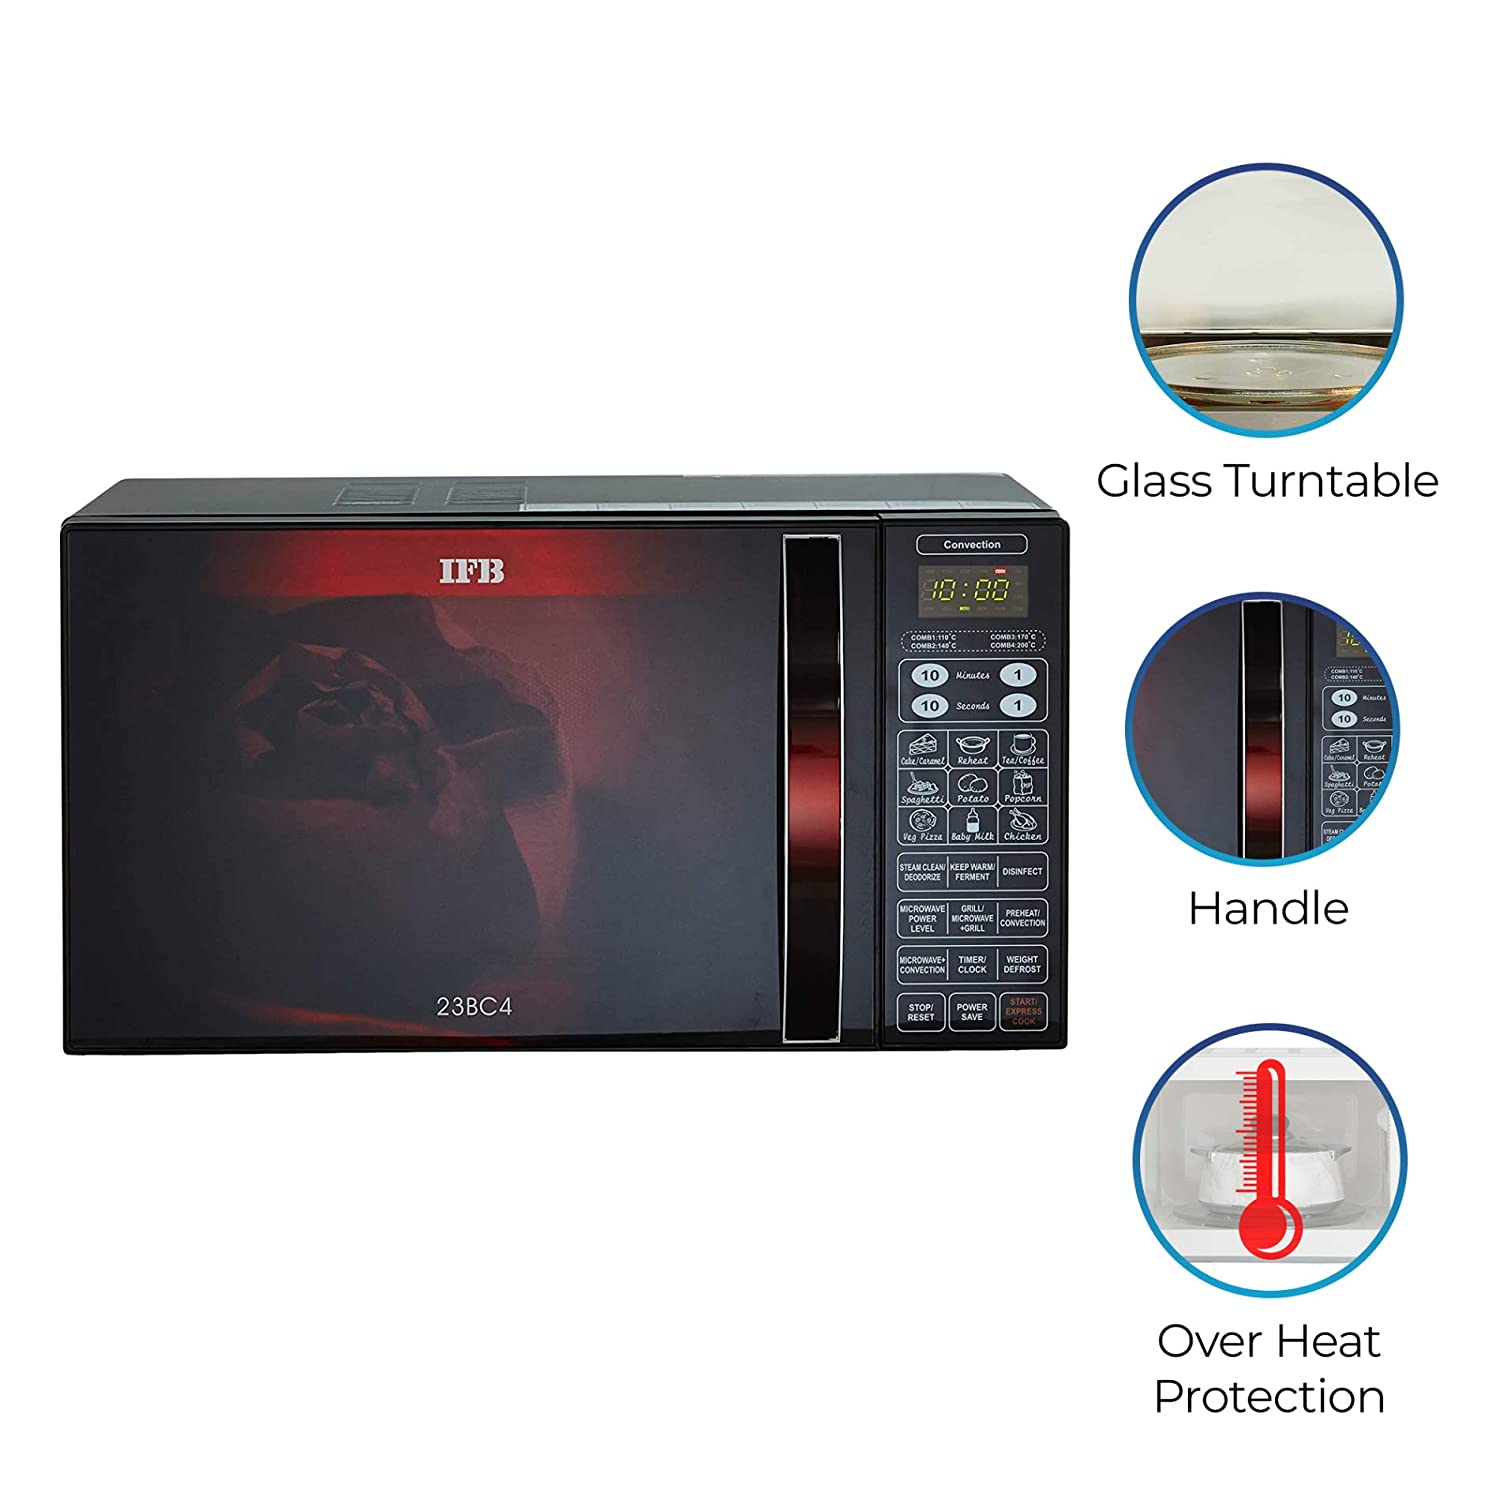 IFB MICROWAVE OVEN 23BC4 (23LTR)